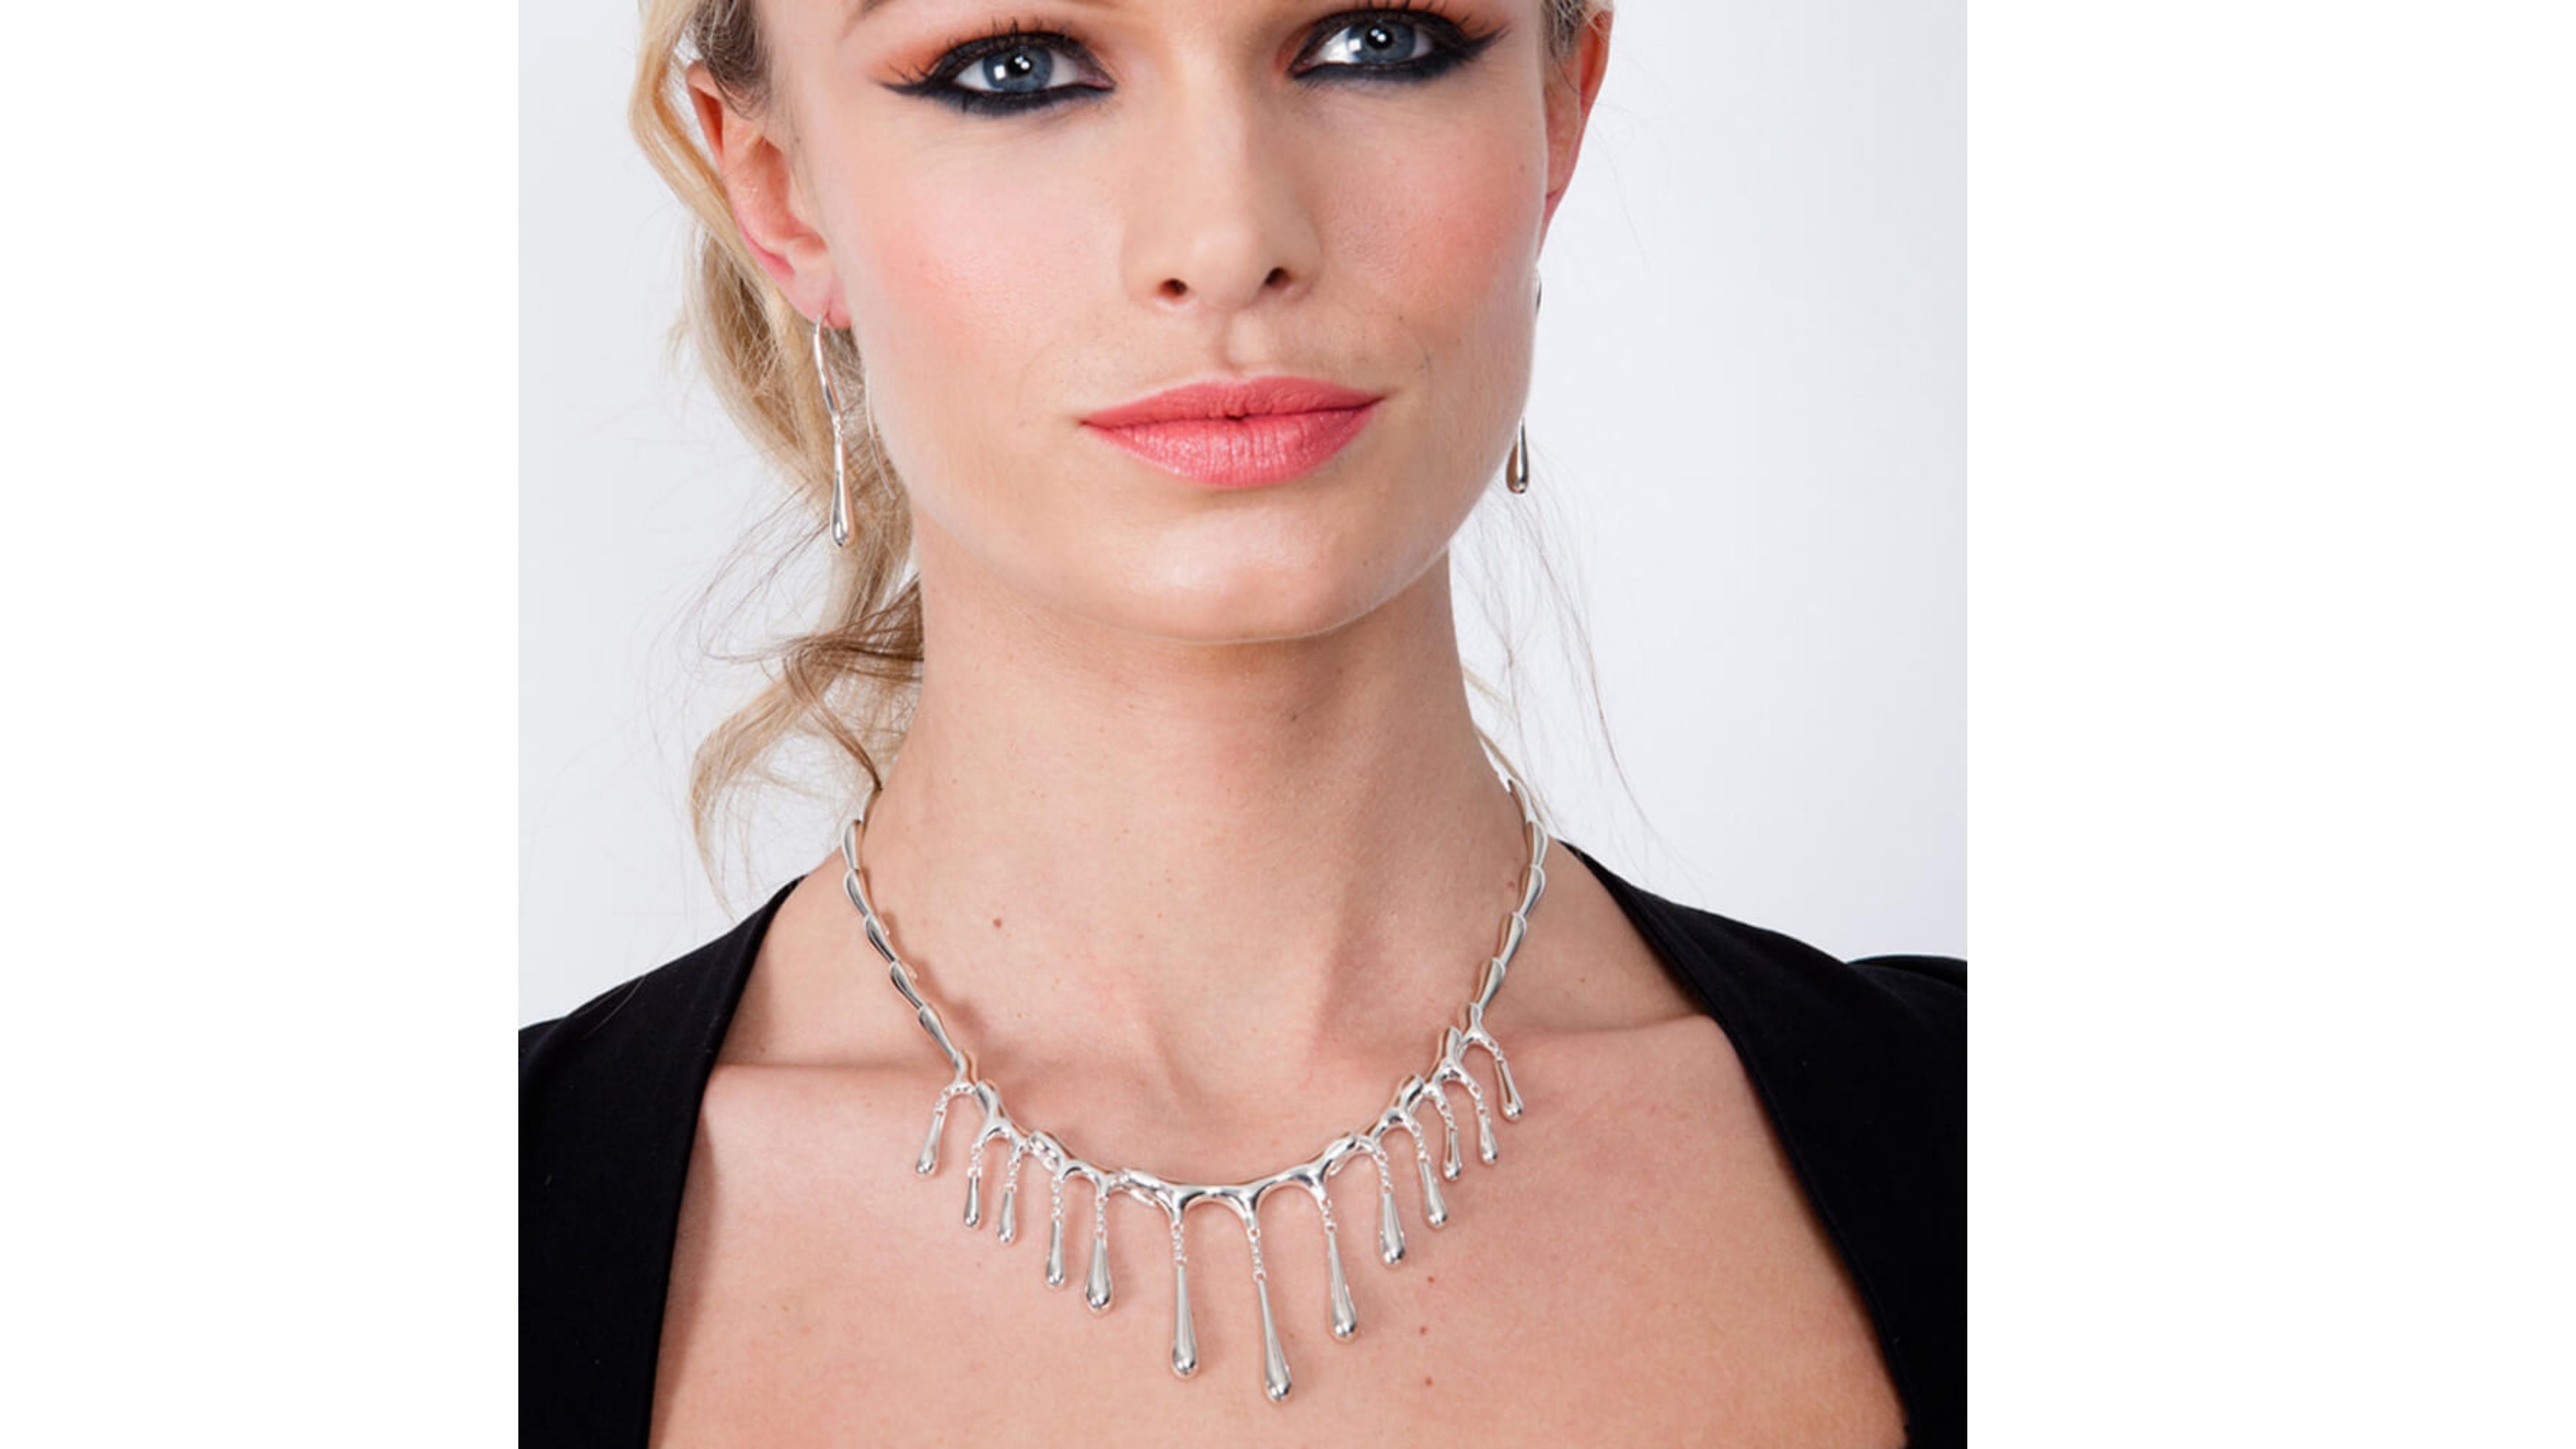 

Create a sense of drama with this iconic Short Multi Drop Necklace. The solid silver droplets give the impression of molten silver cascading down the neck and chest. Amazing to wear and much admired. This stunning design also won ‘Best Necklace in